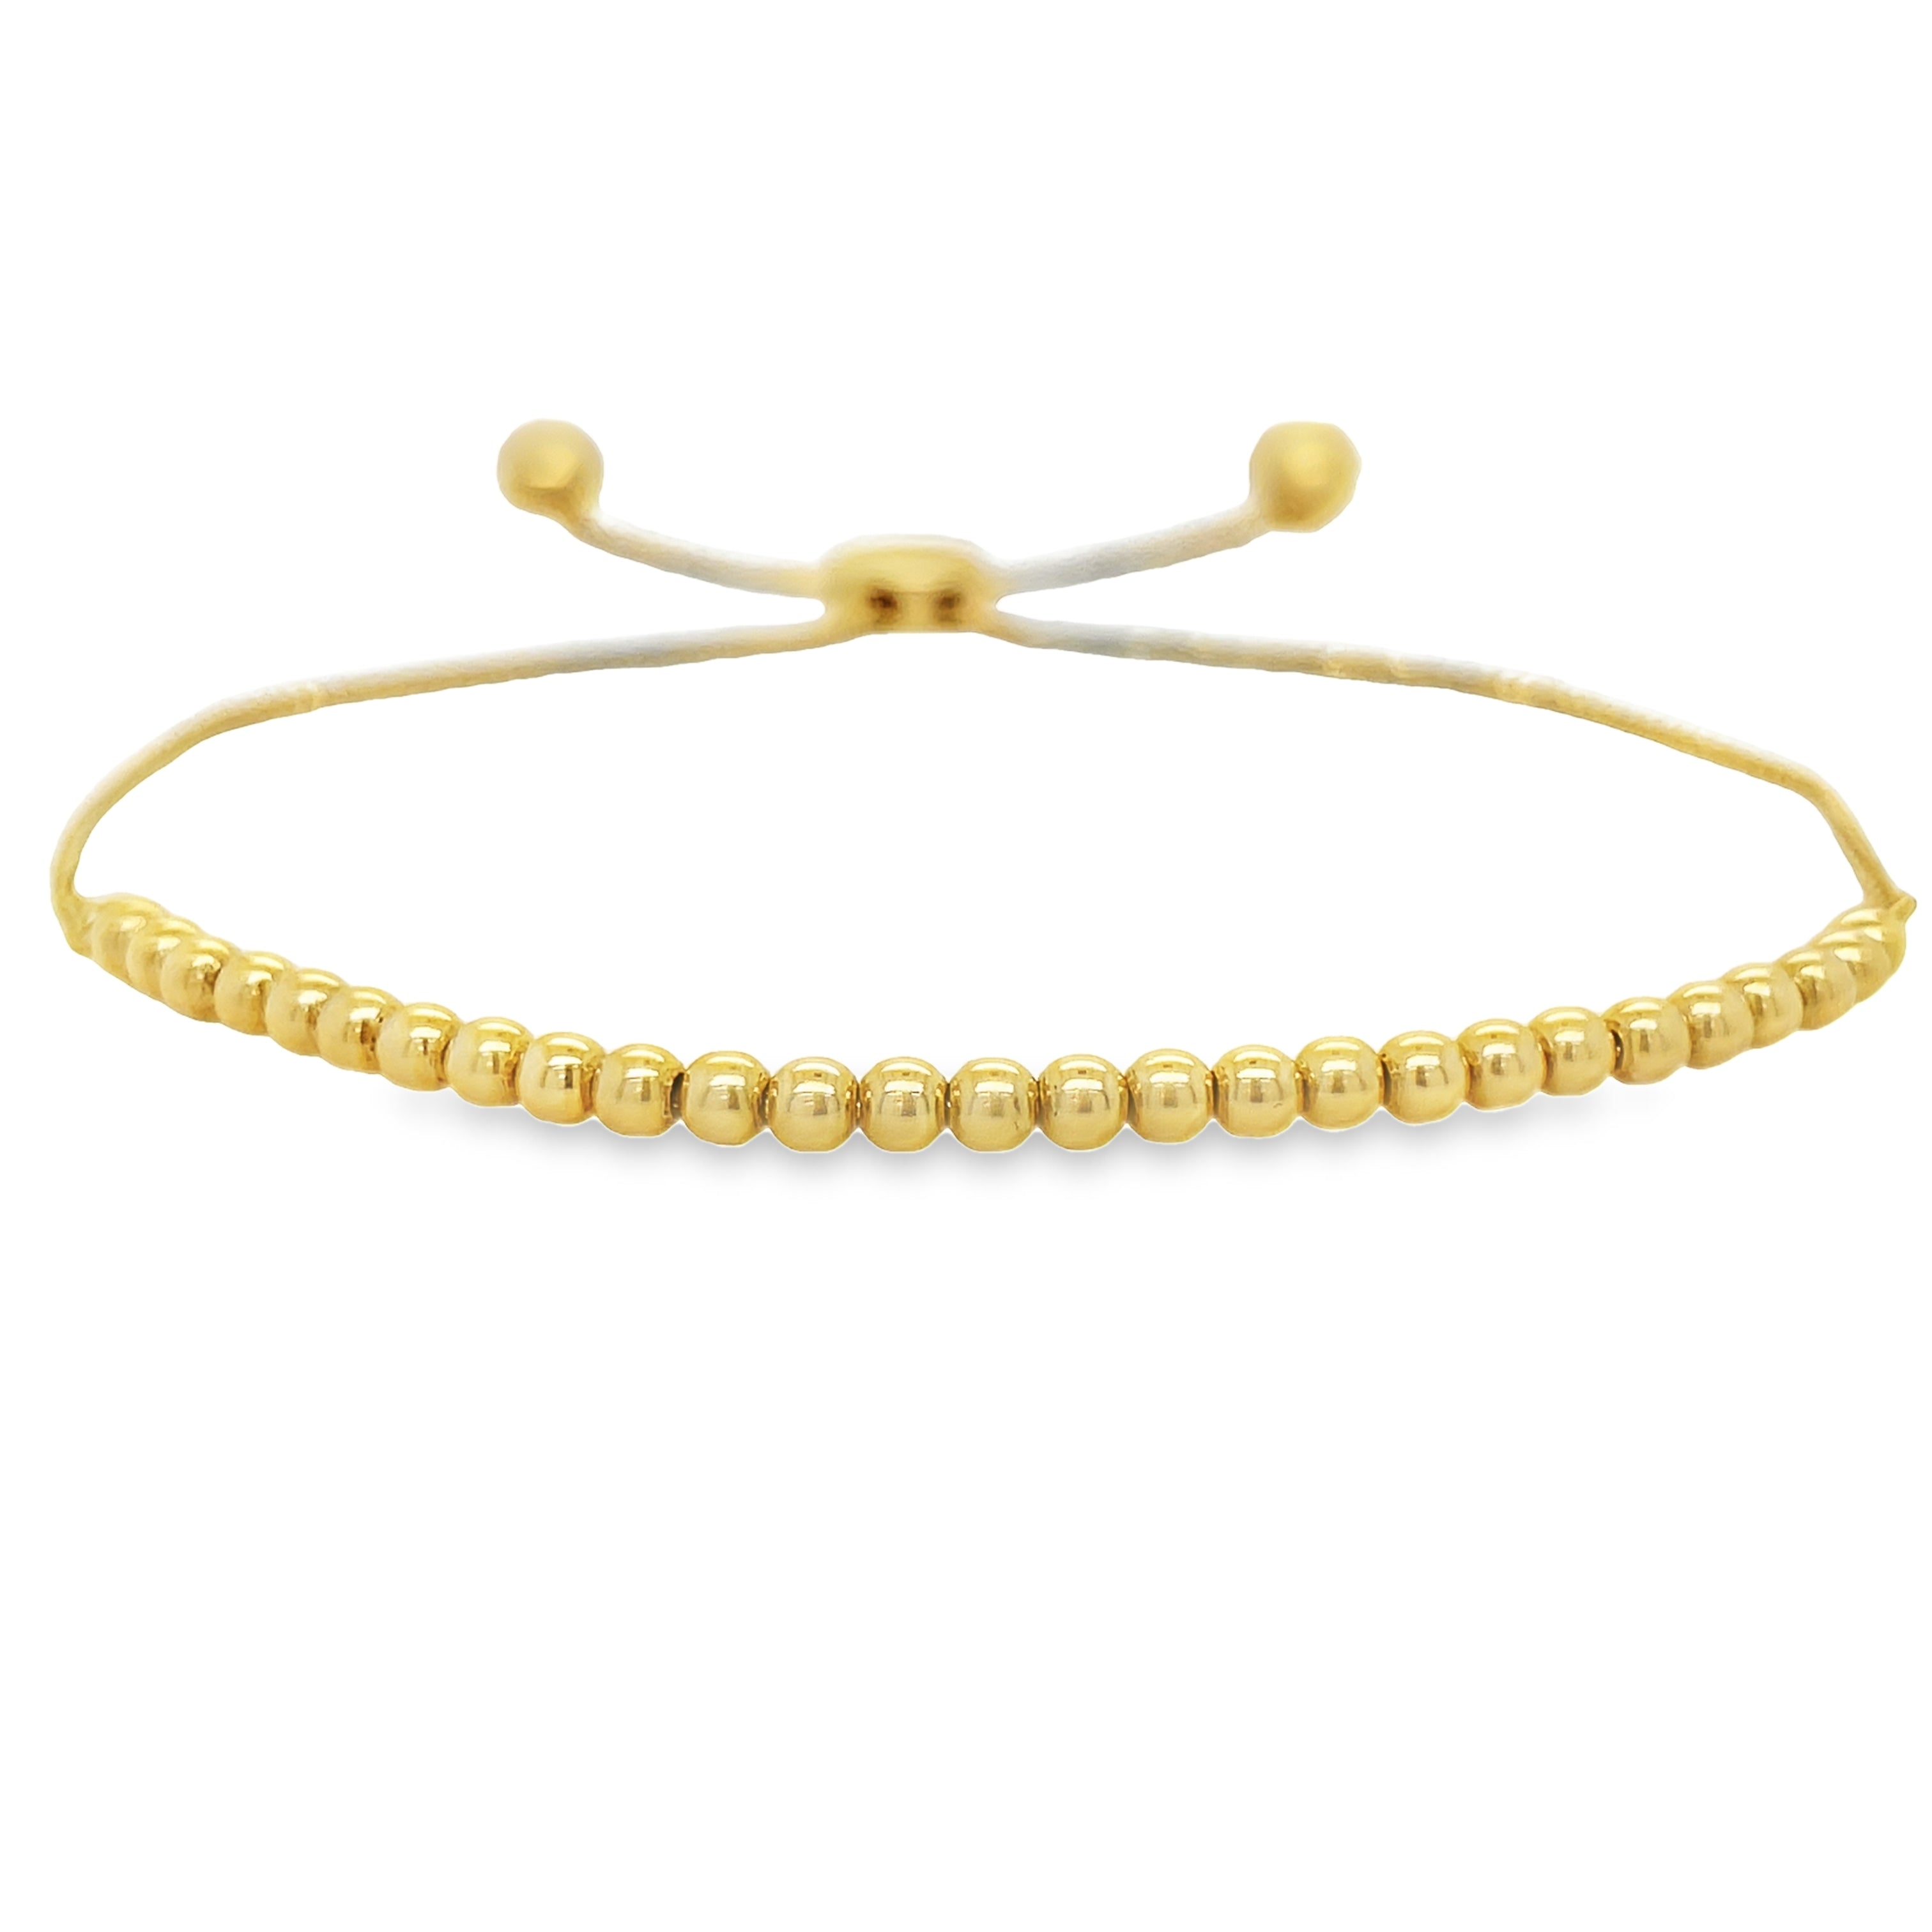 This 14k Yellow Gold Bead Sizeable Bracelet is expertly crafted from 14k yellow gold and features a unique design with delicate gold beads. The sizeable clasp allows for a comfortable fit. Add a touch of elegance to any outfit with this stunning bracelet.